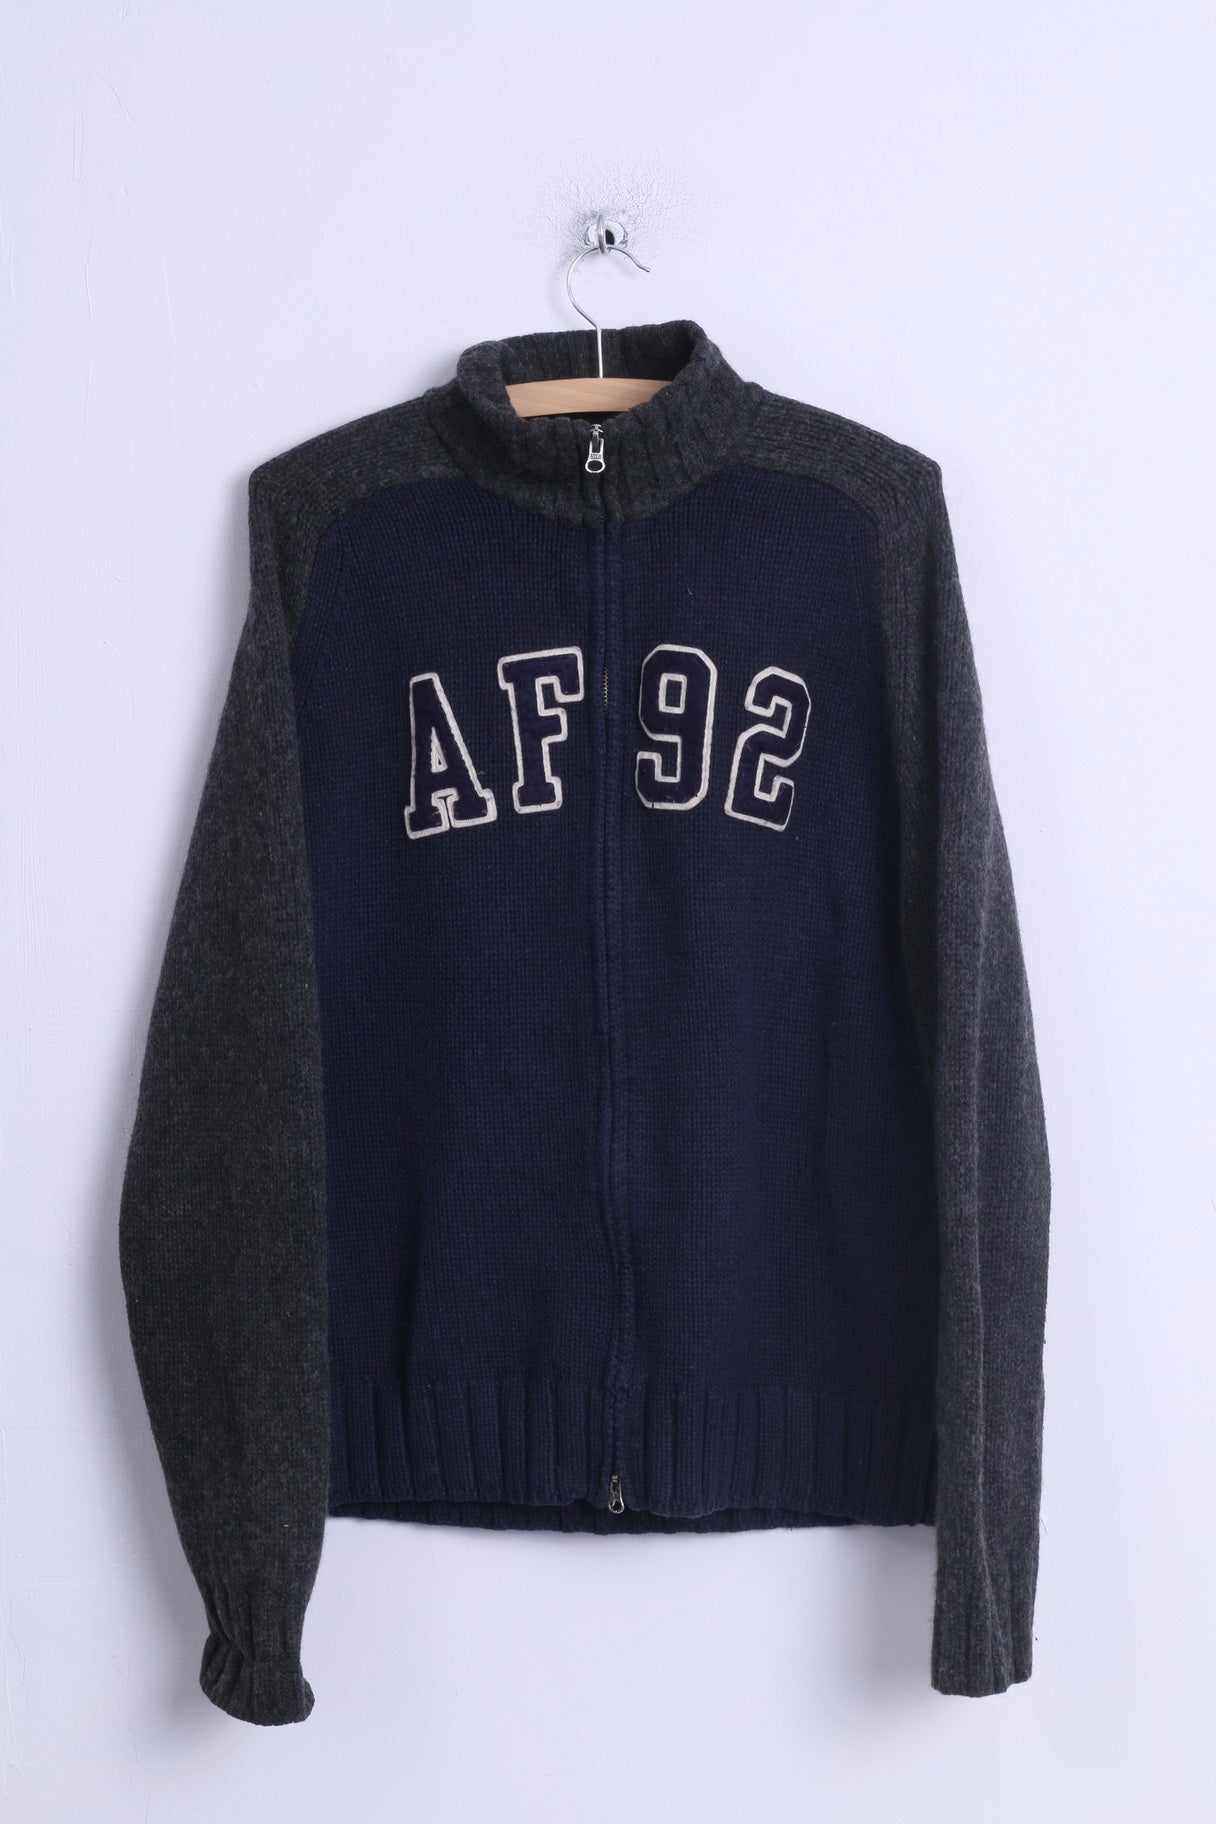 Abercrombie And Fitch Mens Xl Sweater Navy Zip Up Muscle